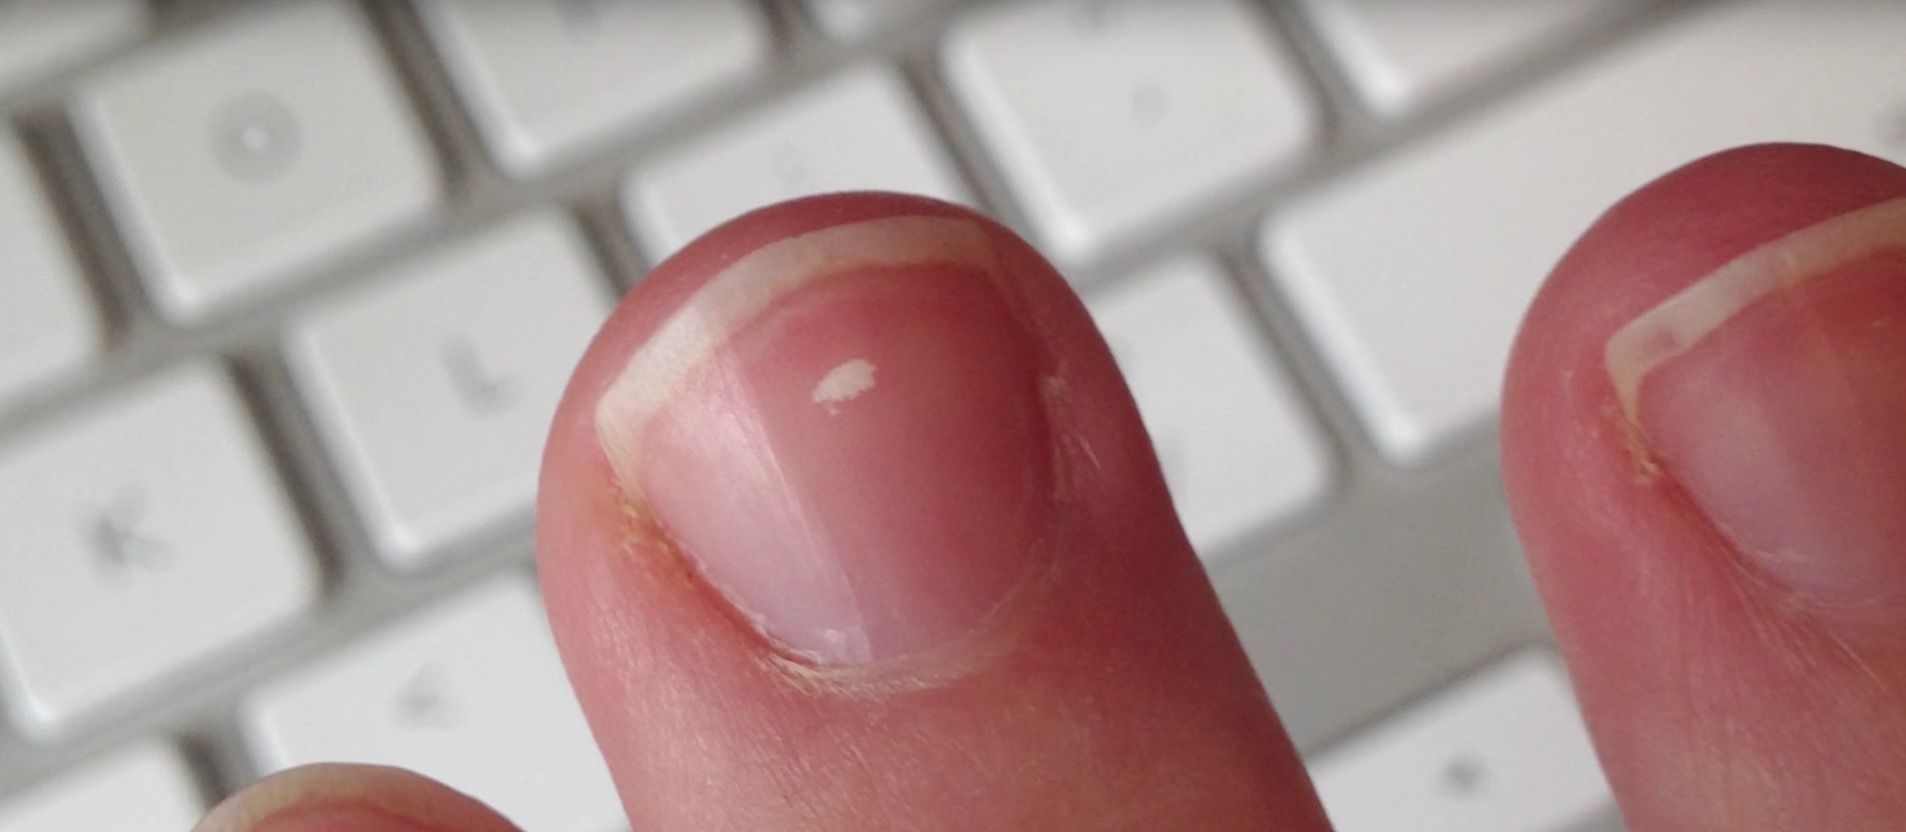 Image: White Spot on the Nail - MSD Manual Professional Edition